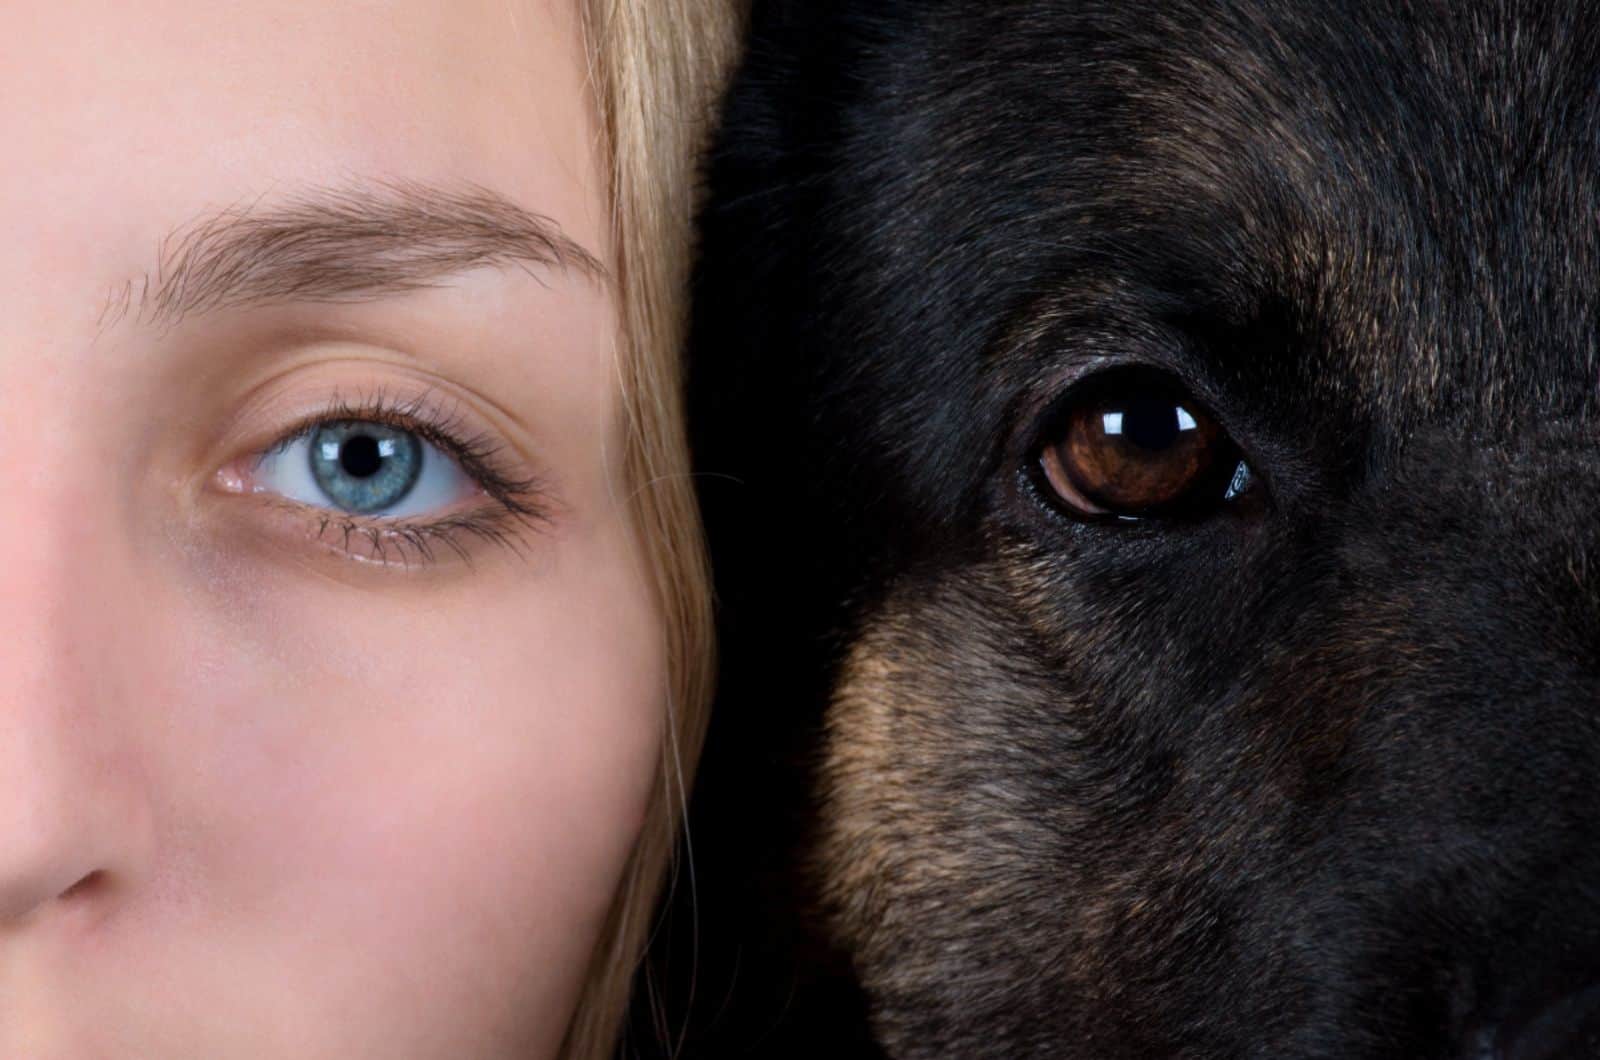 woman and german shepherd posing face to face, eyes close-up